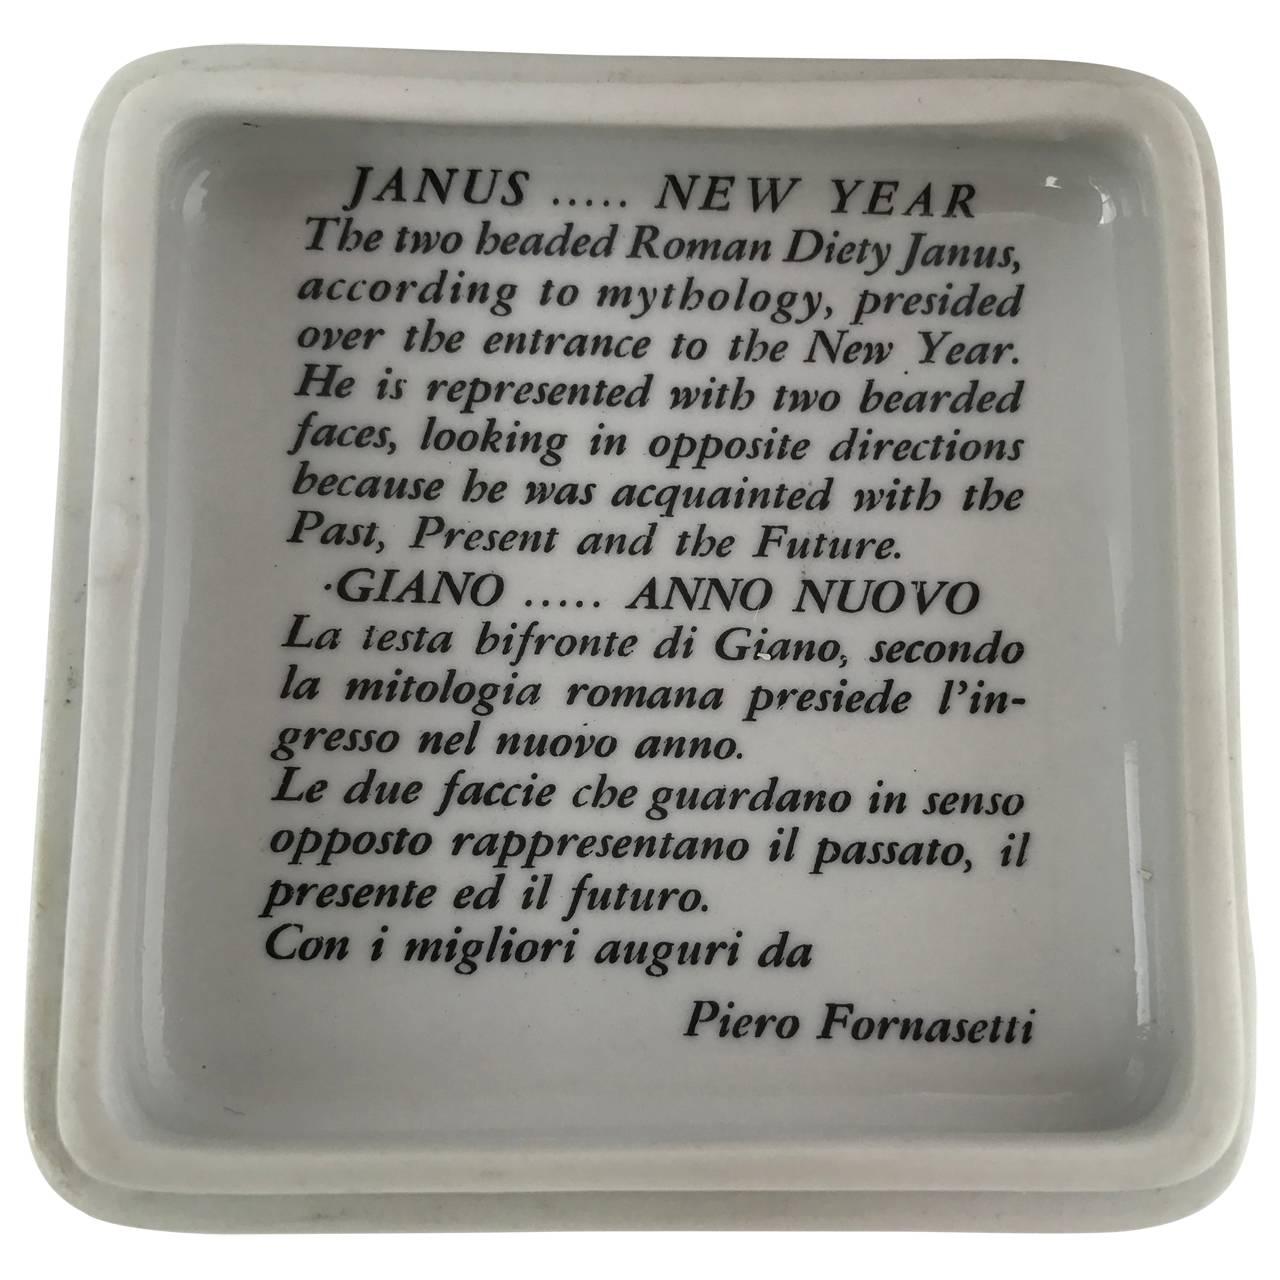 Italian Small Fornasetti Porcelain Jewelry Box with Roman Diety Janus in Profile